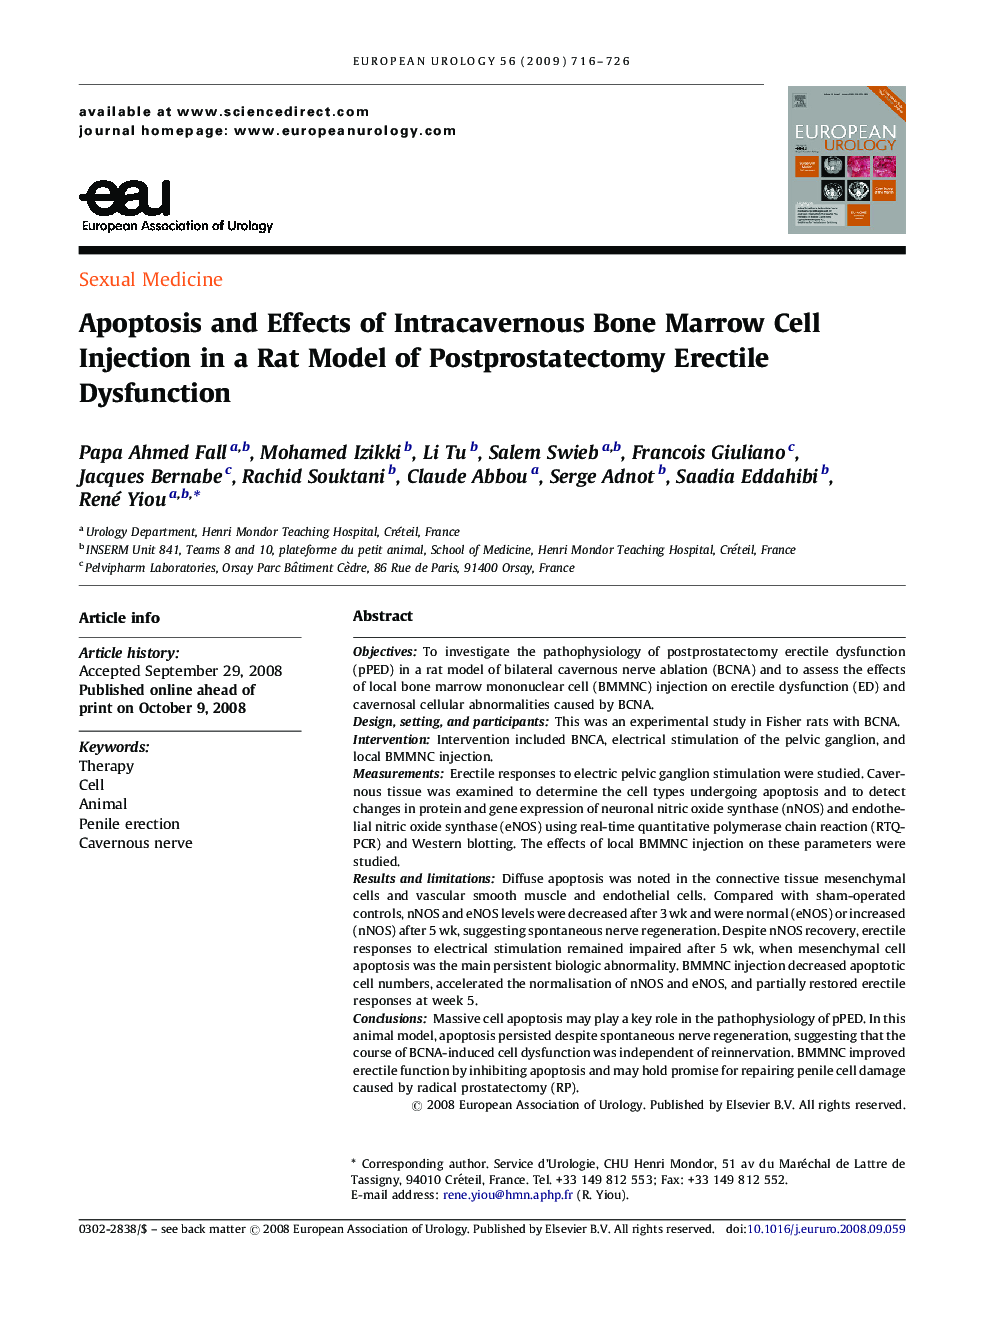 Apoptosis and Effects of Intracavernous Bone Marrow Cell Injection in a Rat Model of Postprostatectomy Erectile Dysfunction